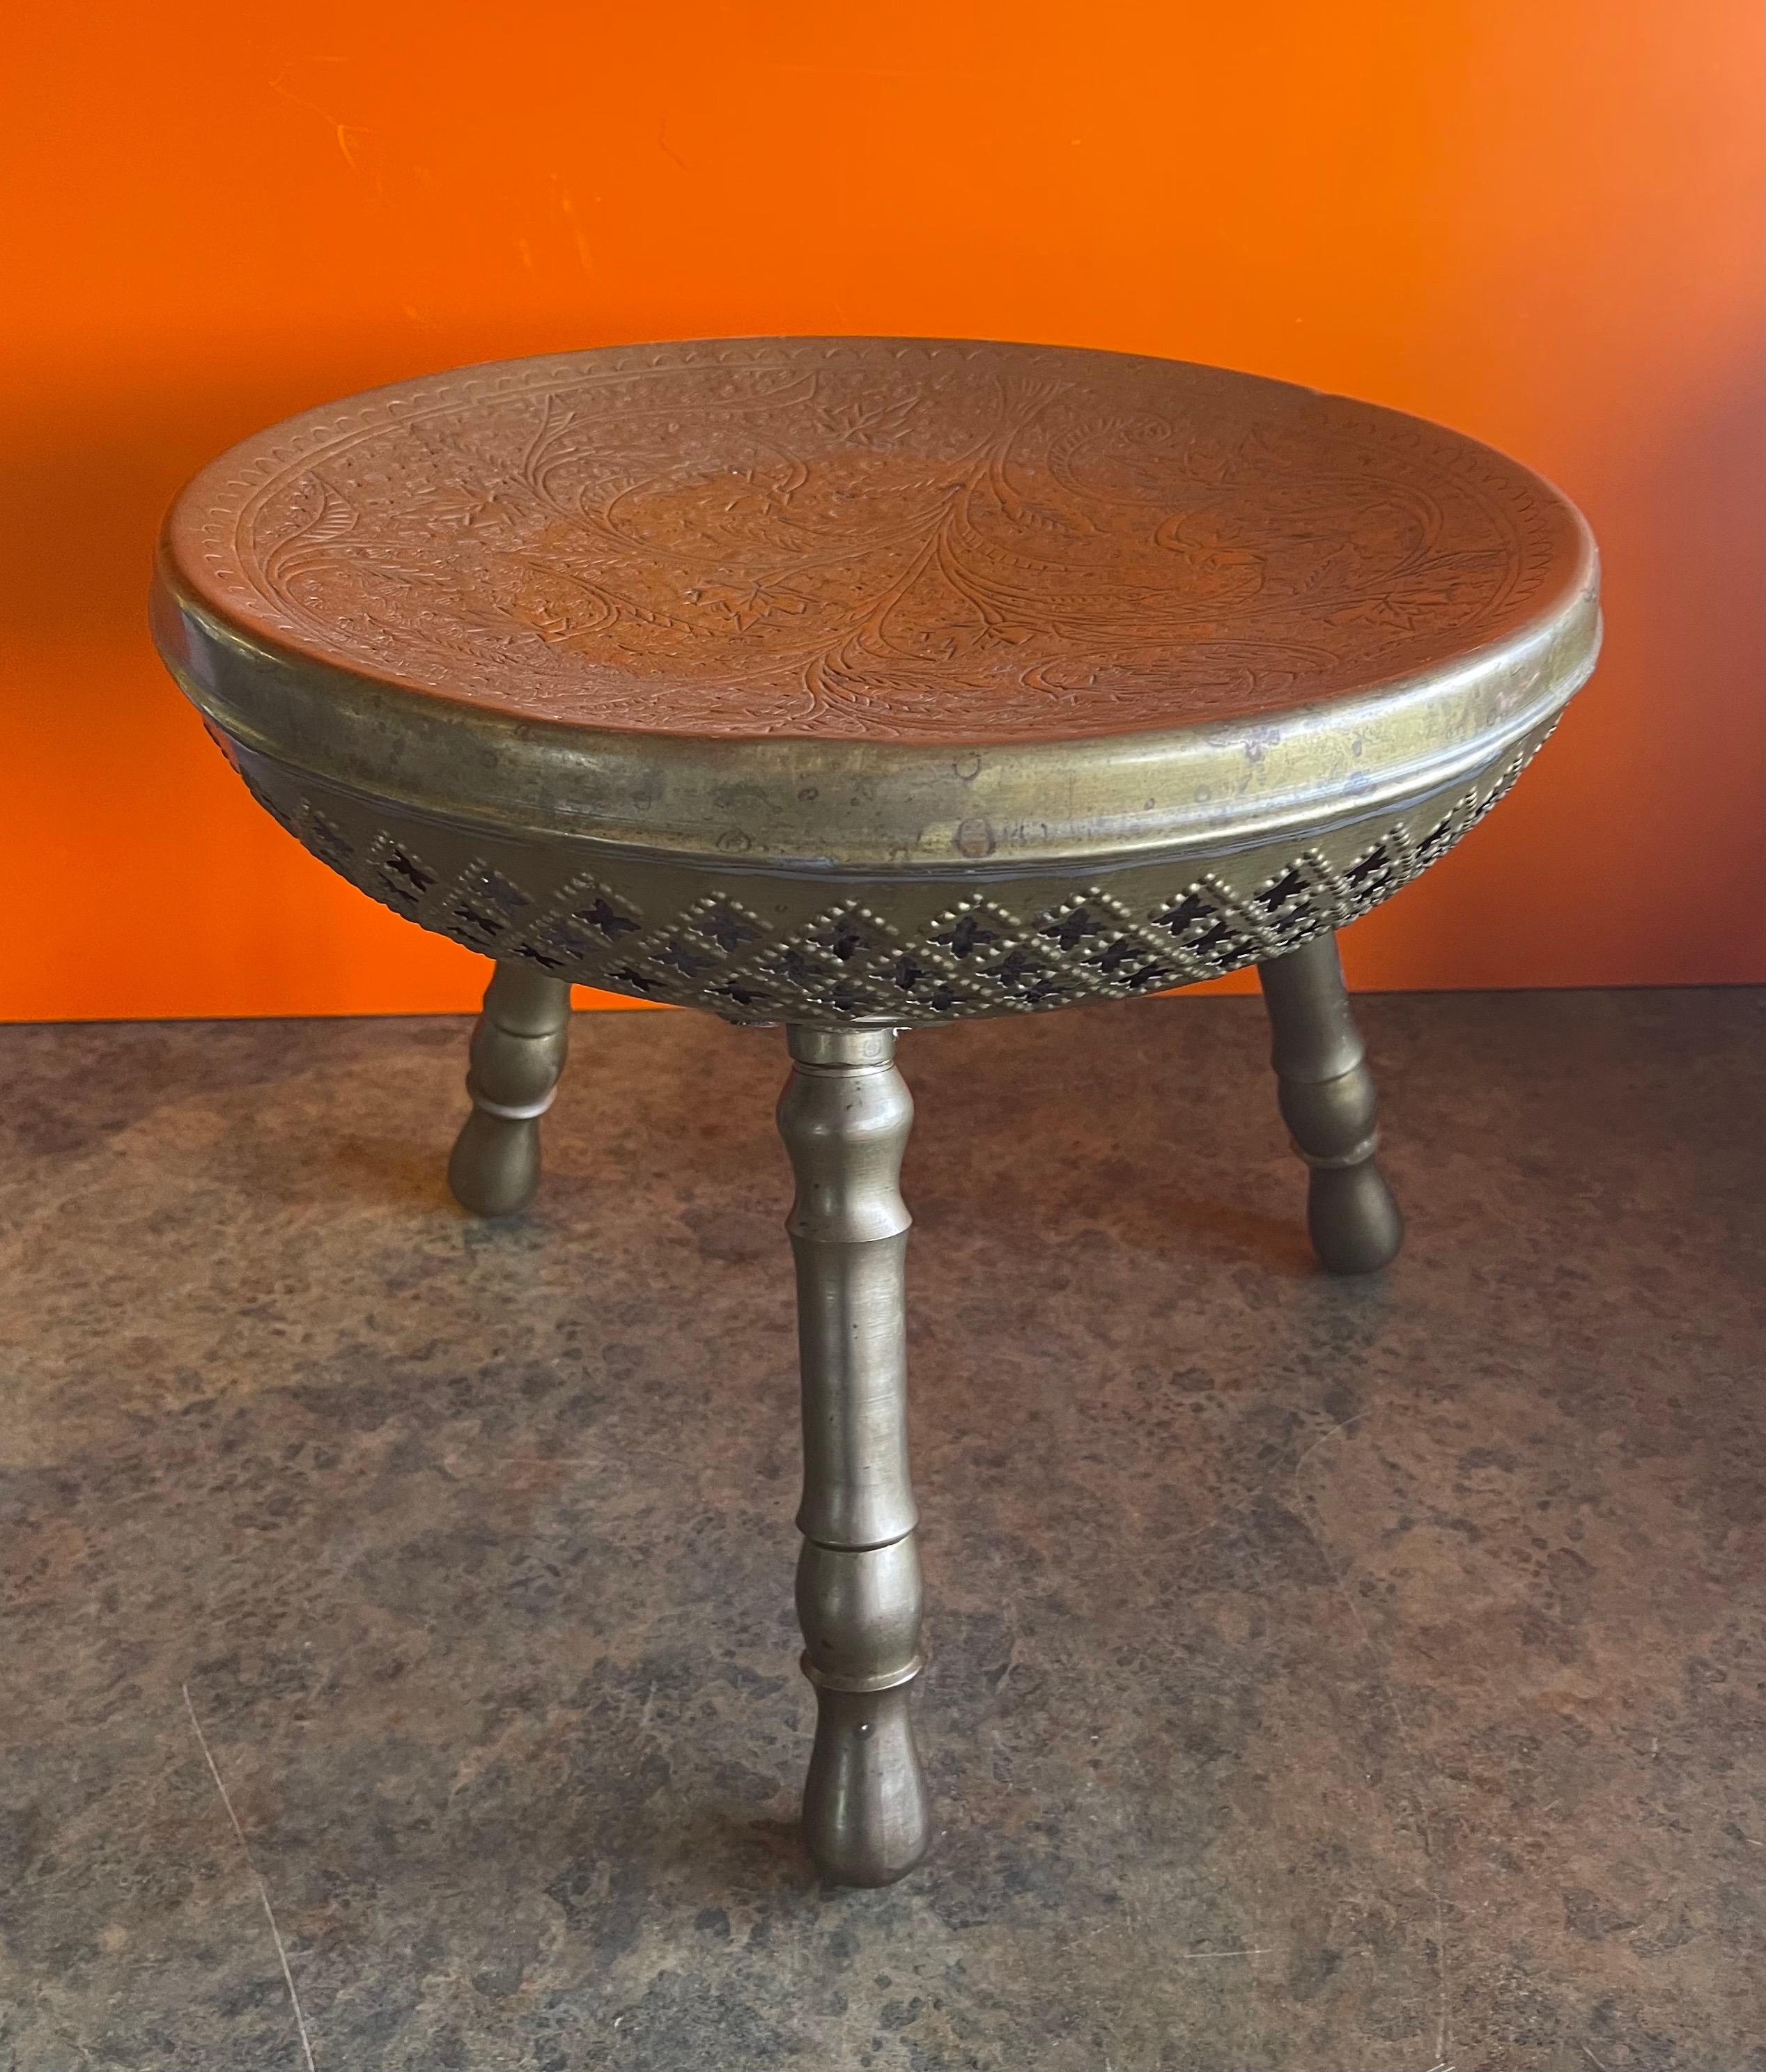 Indian brass three legged foot stool in brass, circa 1970s. Great patina finish and enscibed circular design; Legs unscrew for easy storage. A very interesting, decorative and functional piece! #1490.